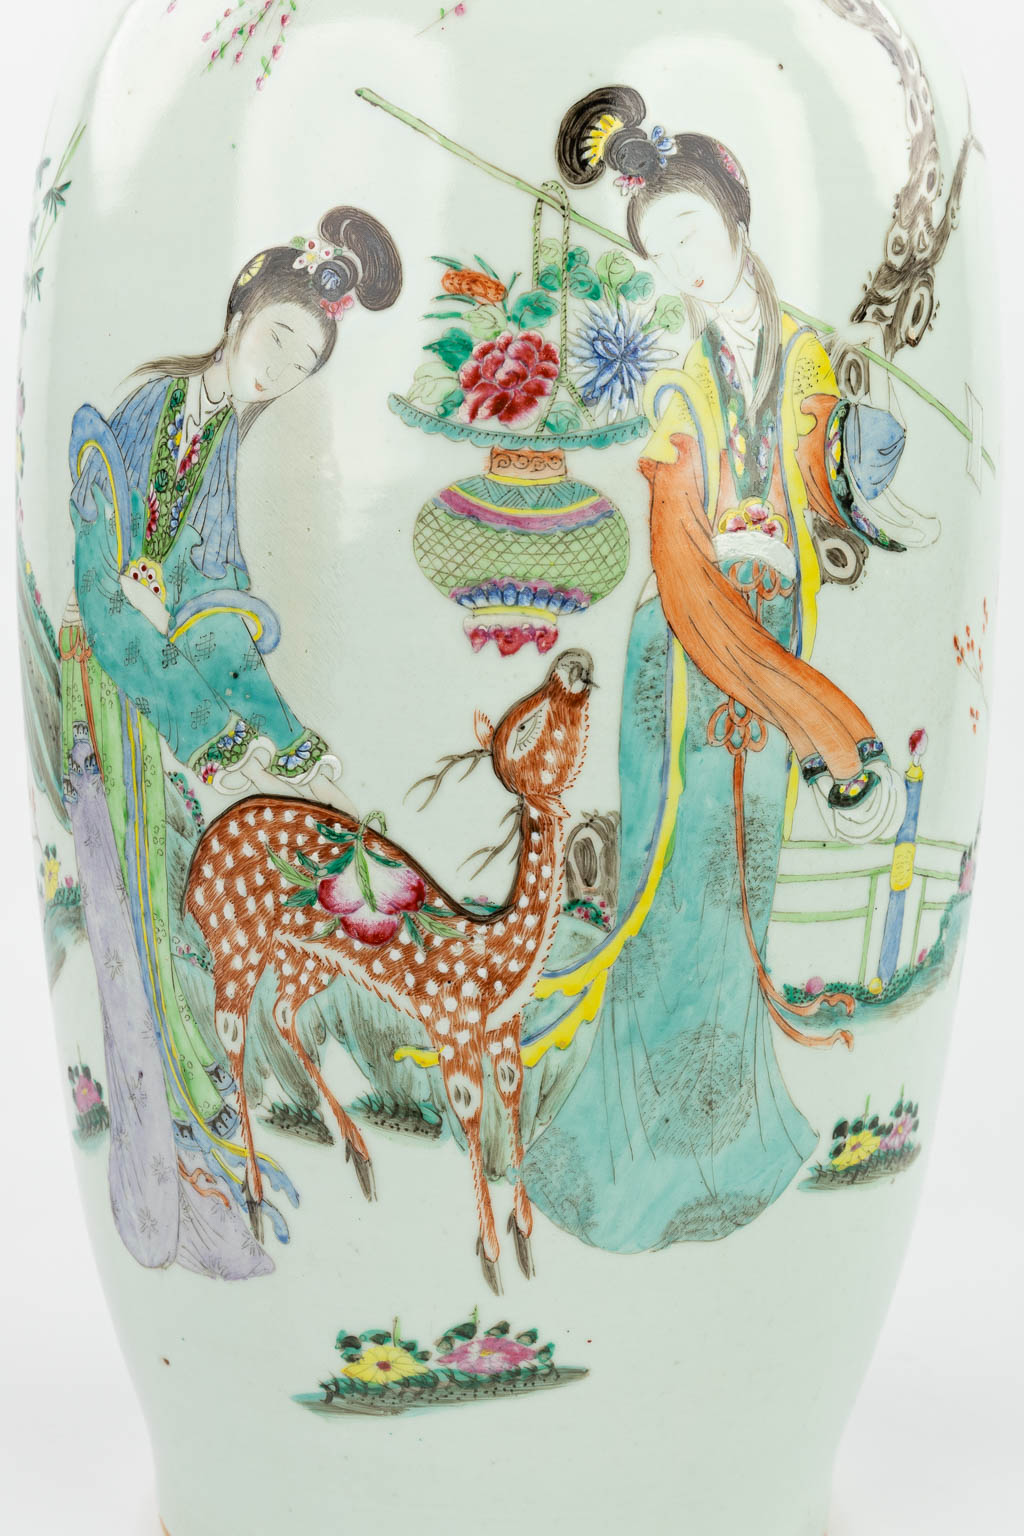 A Chinese vase made of porcelain and decorated with ladies and a deer. (H:57cm)